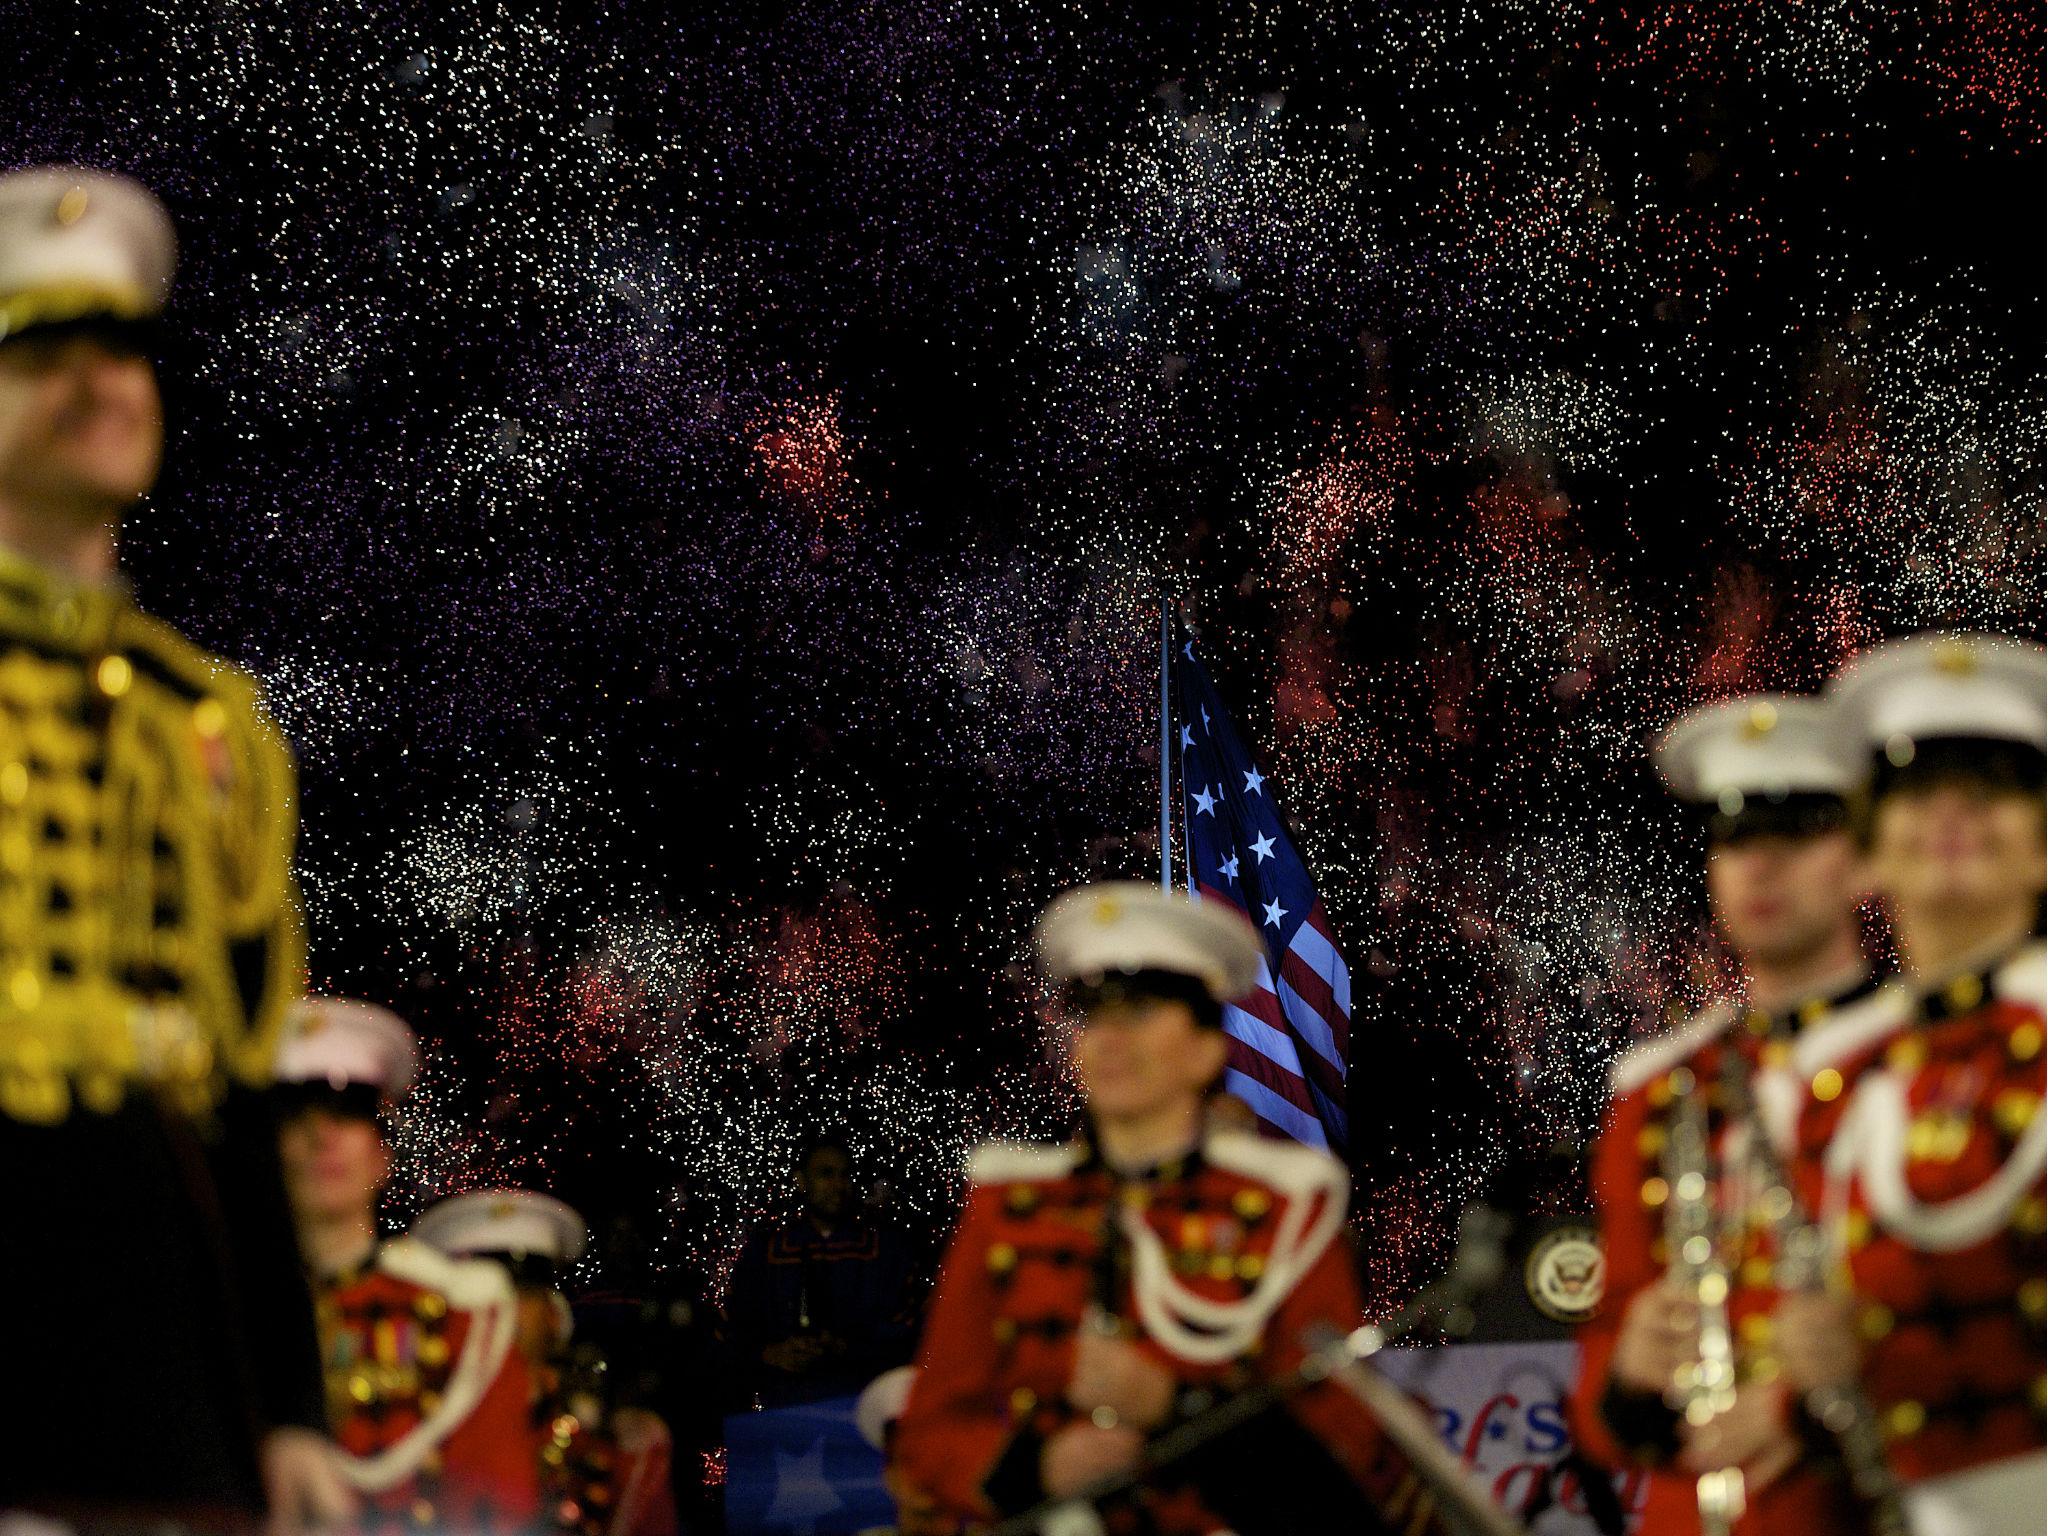 Members of the President's Own Marine Band stand during a fireworks display commemorating the bicentennial of the writing of The Star-Spangled Banner at Fort McHenry National Historic Park on September 13, 2014 in Baltimore, Maryland.